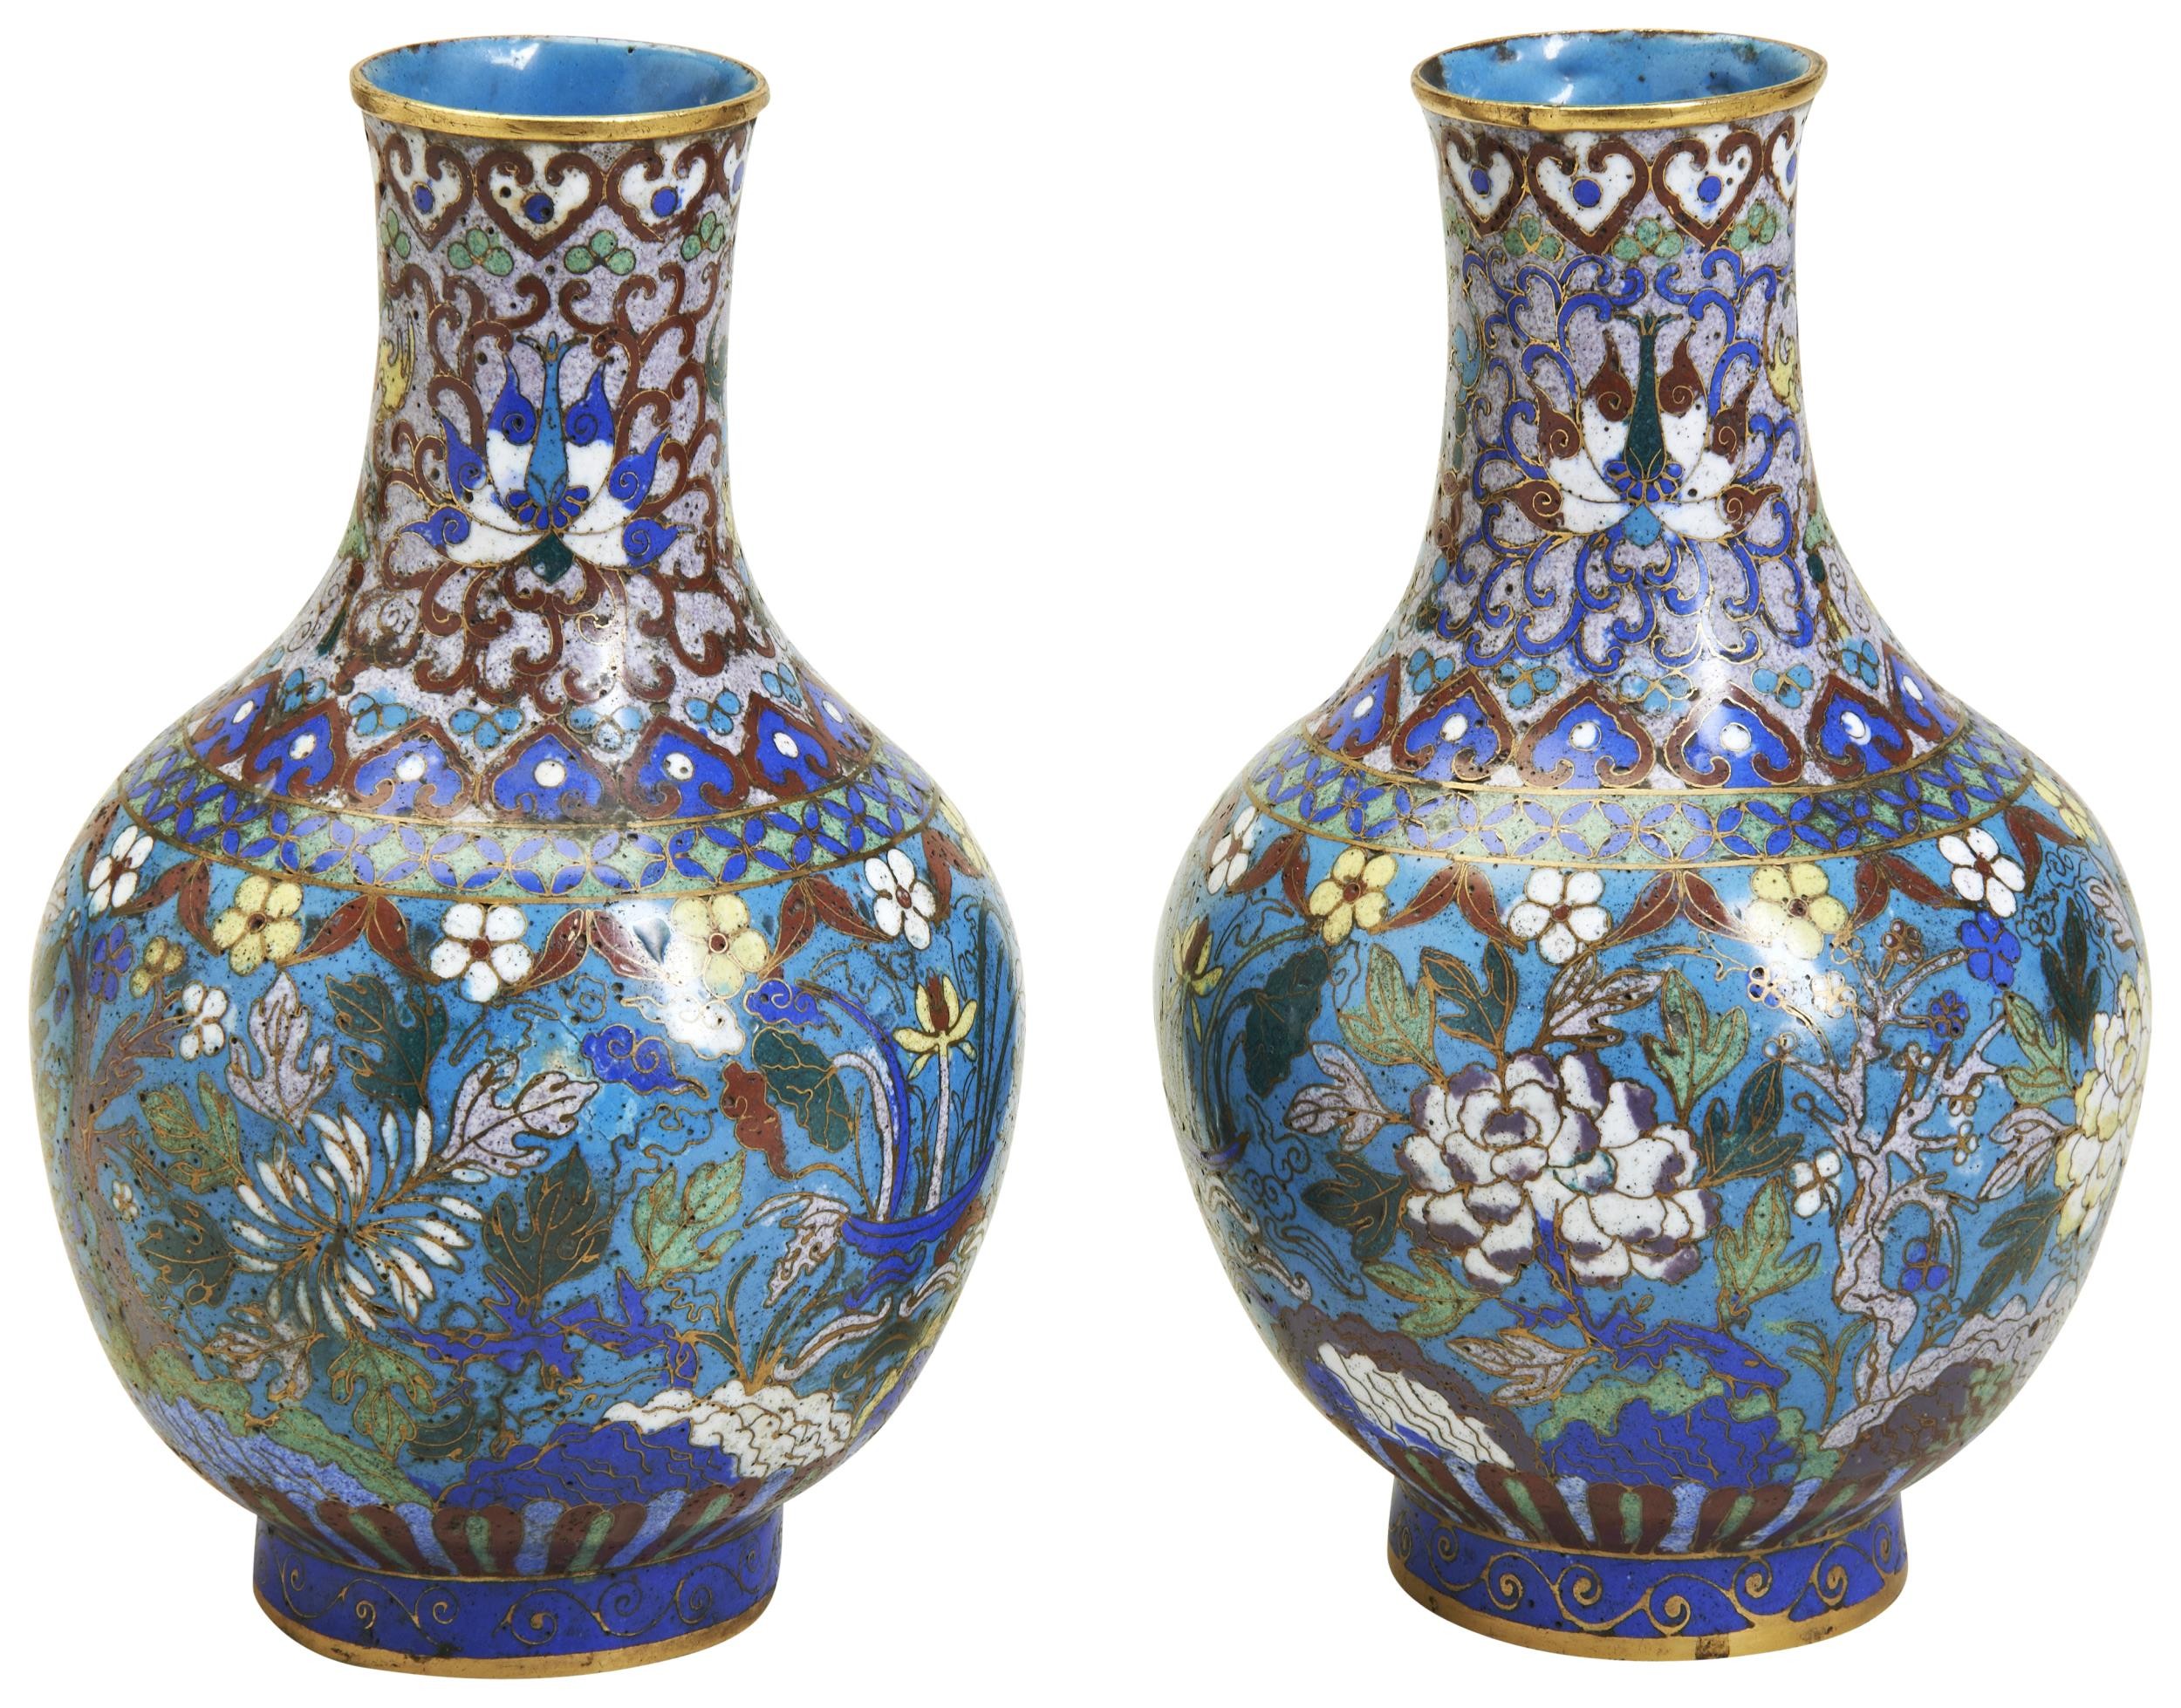 A PAIR OF CLOISONNE VASES QING DYNASTY, 19TH CENTURY of baluster form, the sides decorated in